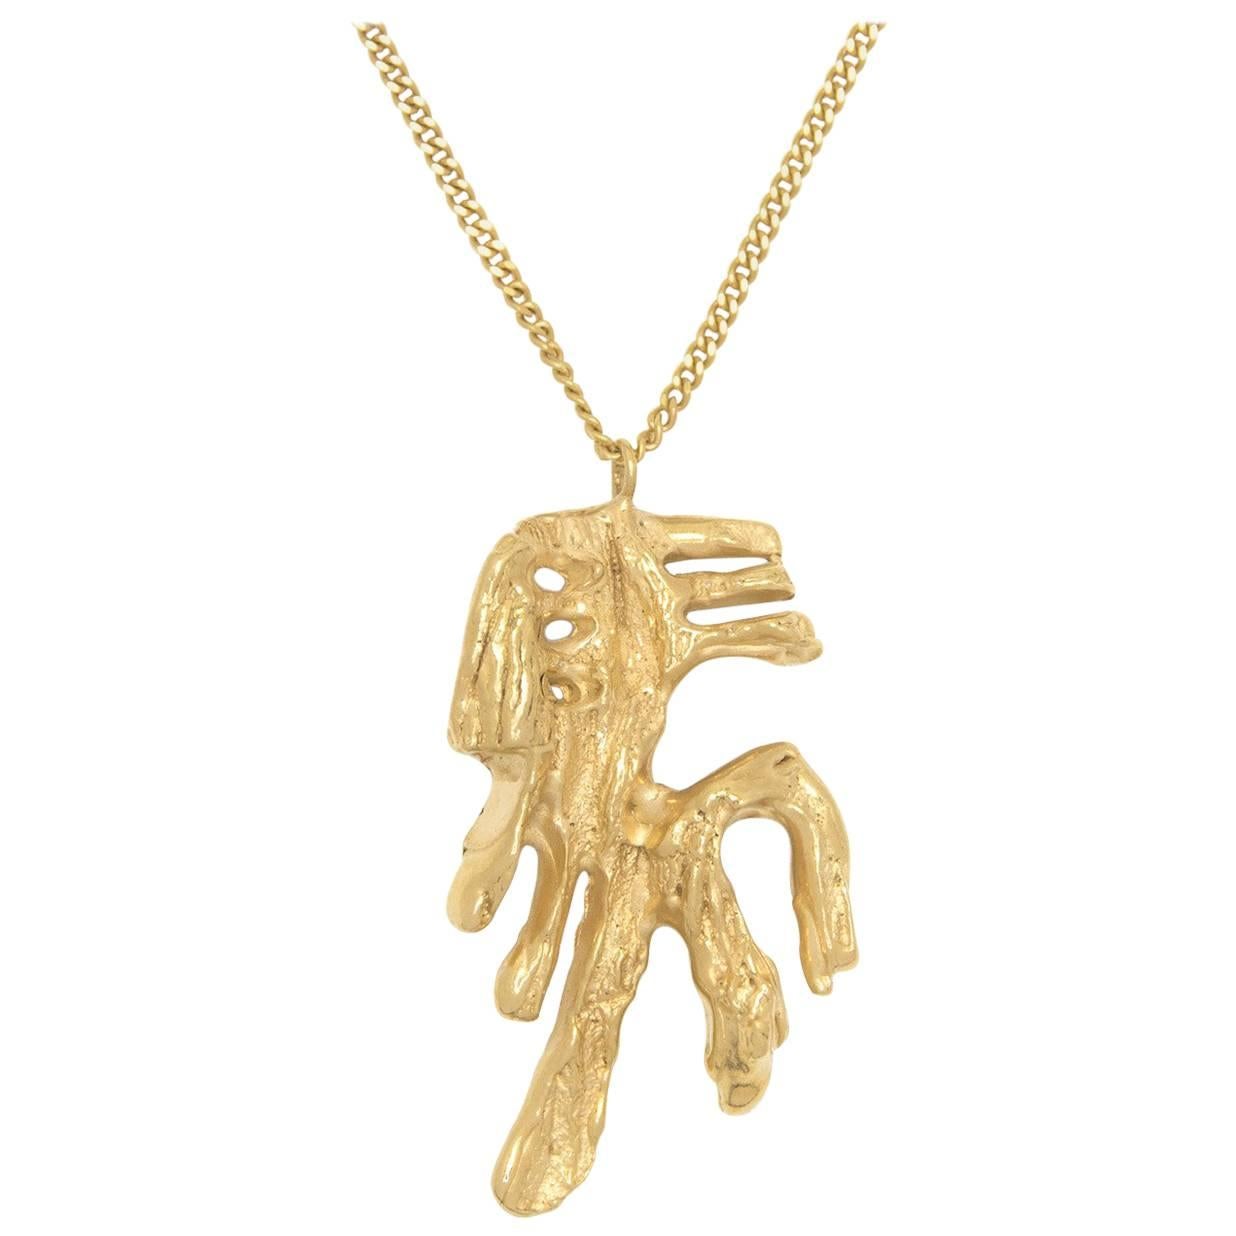 Loveness Lee Chinese Zodiac Horse Horoscope Gold Pendant Necklace For Sale